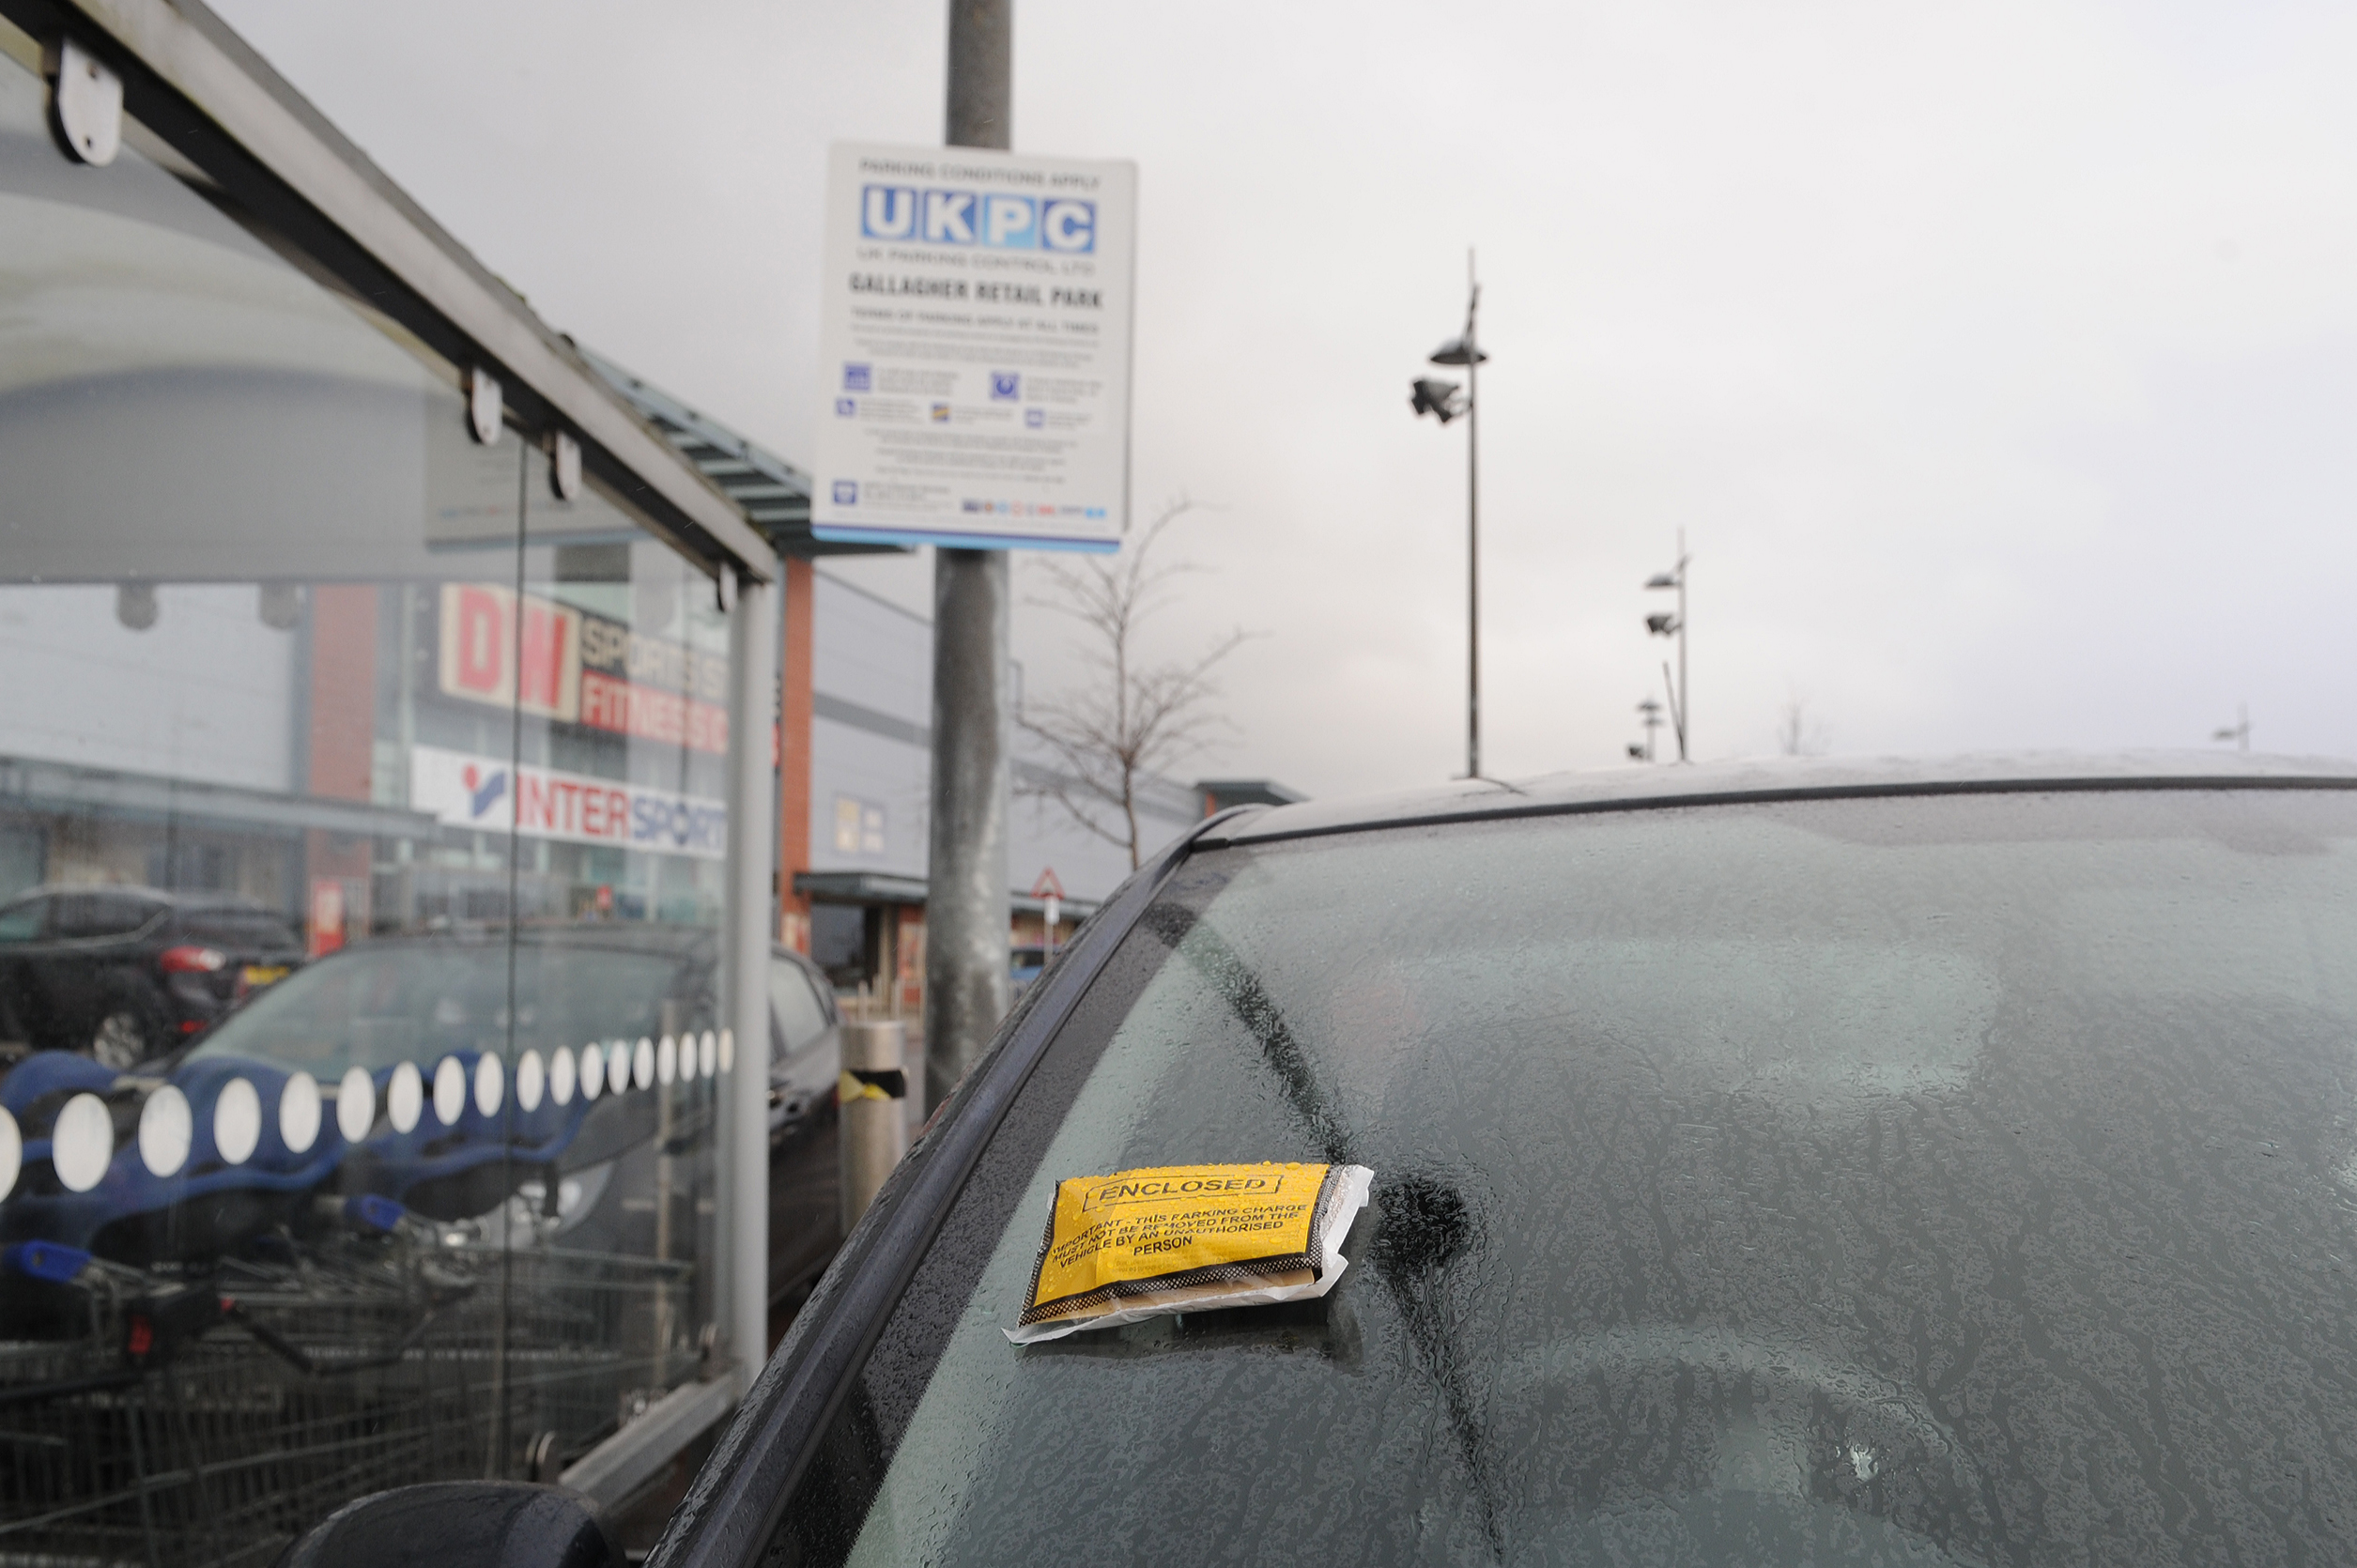 A parking ticket issued in Gallagher Retail Park.